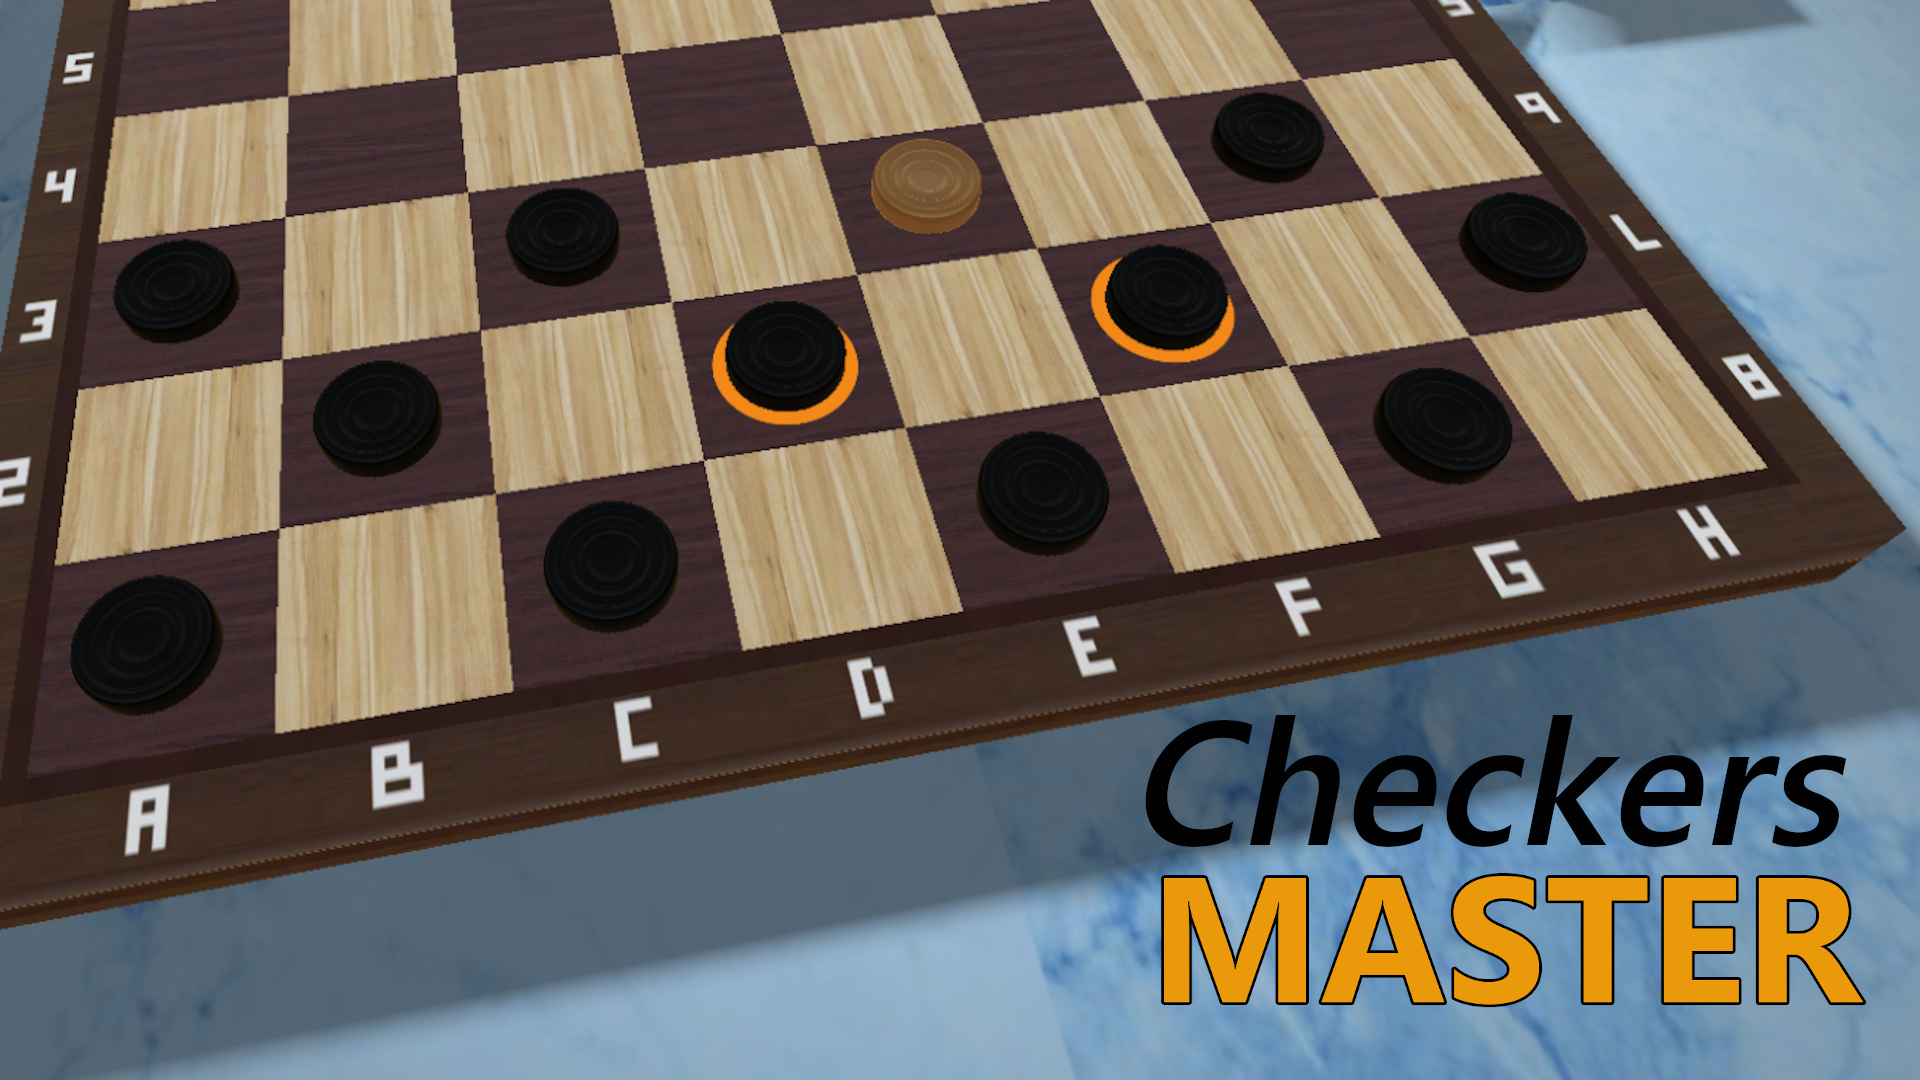 ALL Chess - Metacritic